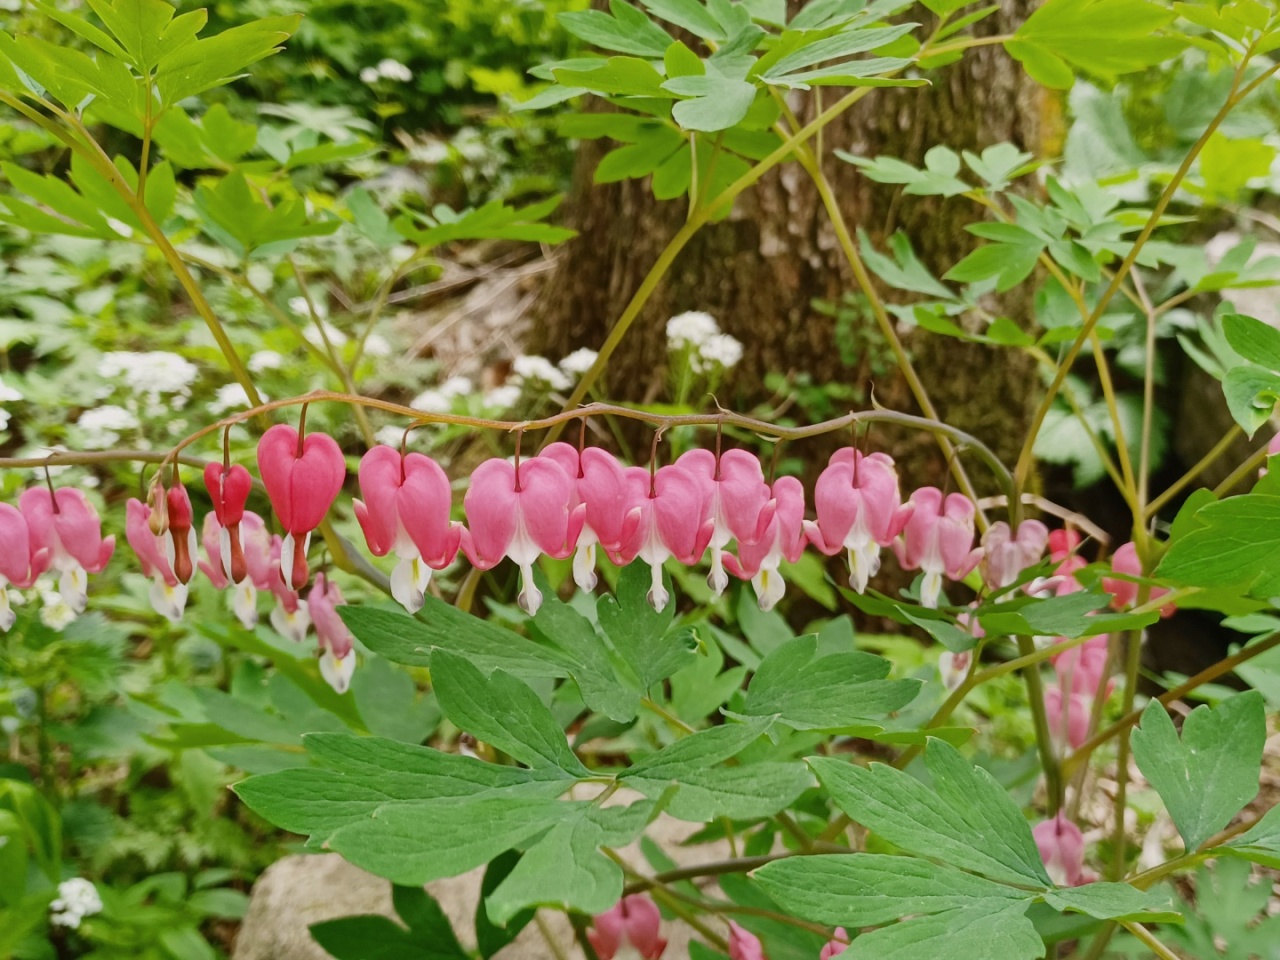 Visitors can see the bleeding hearts in full bloom from April to May. (Lee Si-jin/The Korea Herald)